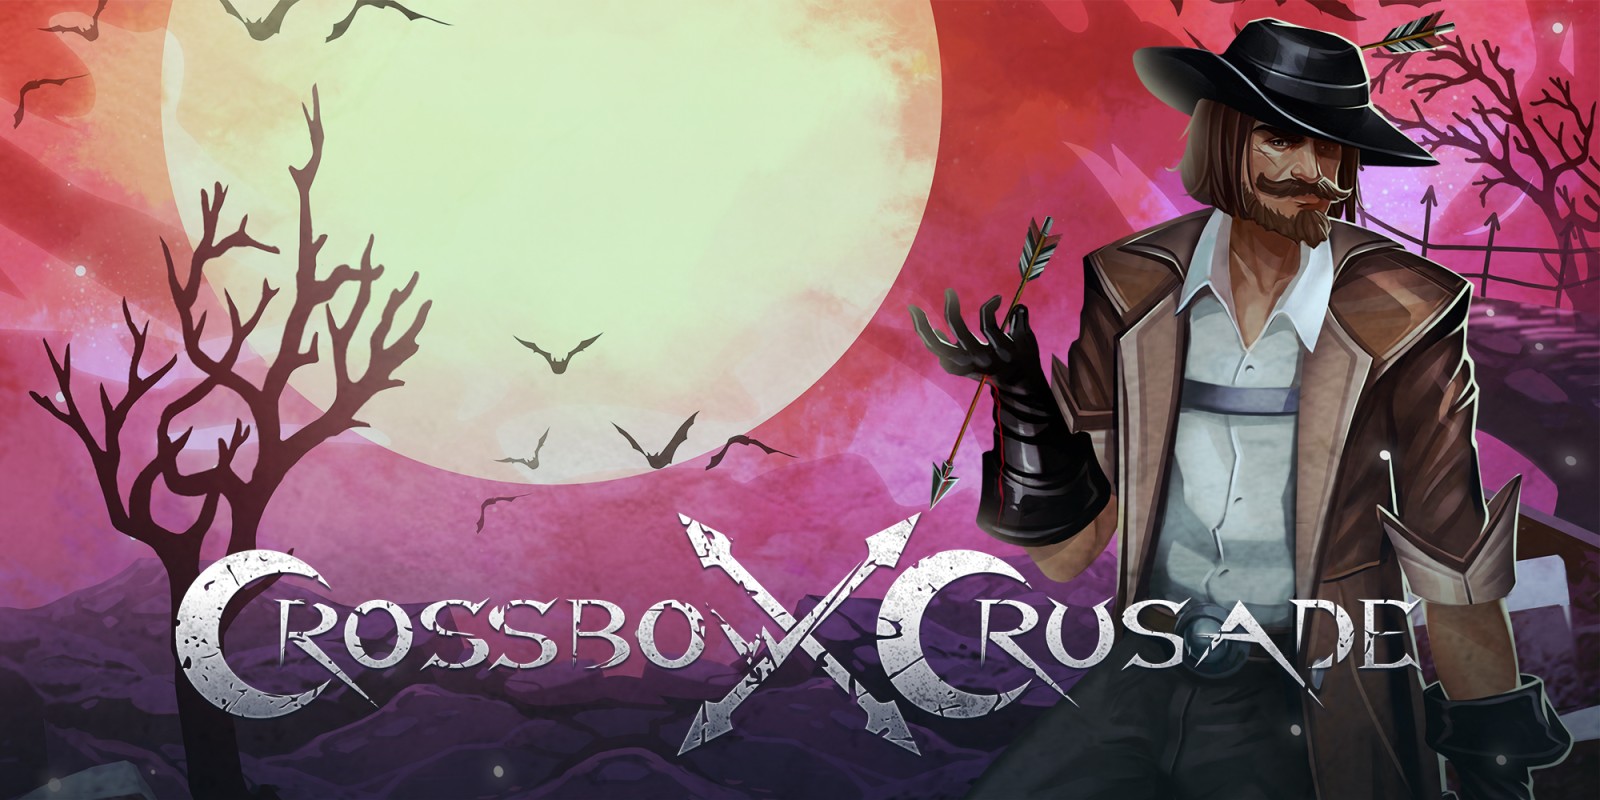 discovery zone crossbow crusade